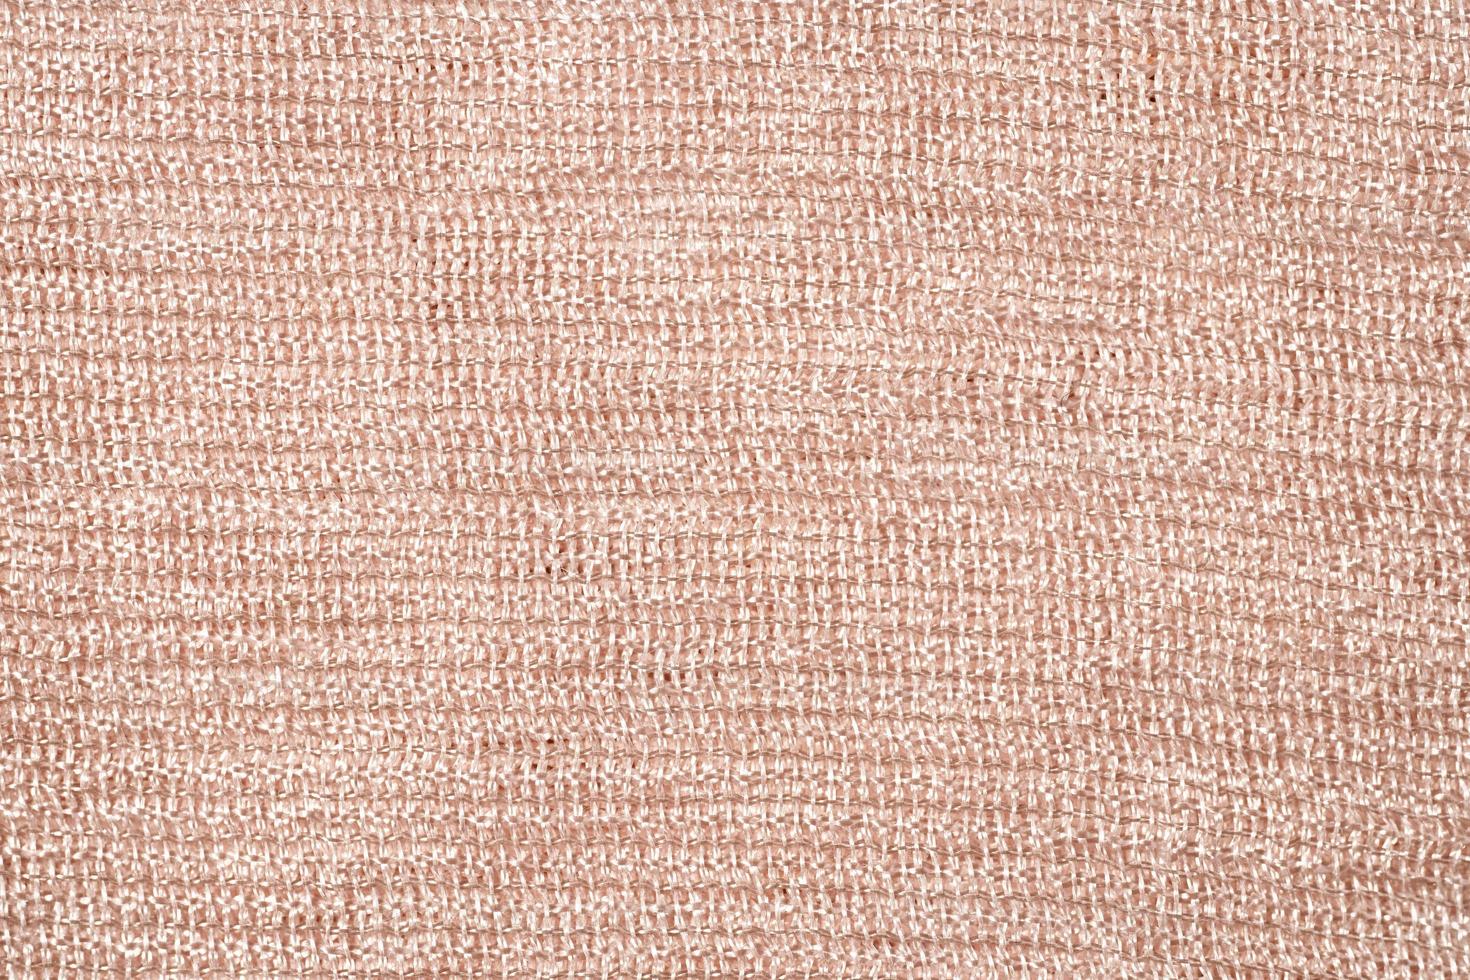 Woven pink texture photo